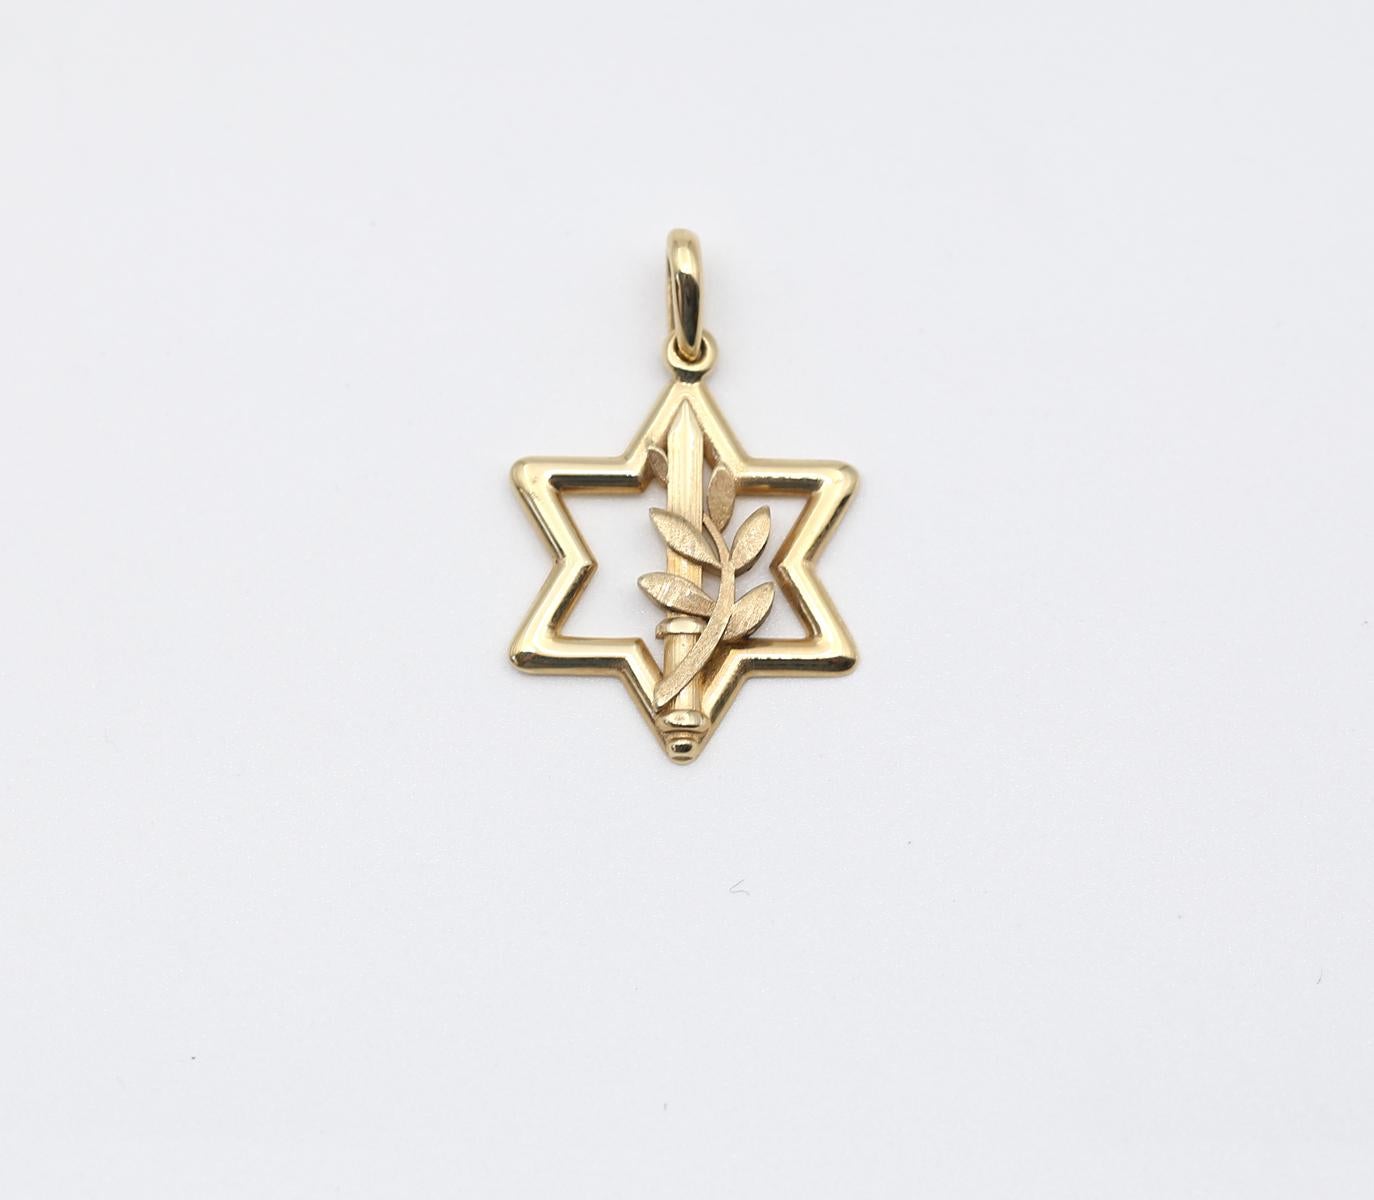 Defence Forces of Israel emblem. The Sword symbolizes combat, while the Olive Branch represents the yearning for peace. The Star of David represents the Jewish people.

The olive branch-wrapped sword was the symbol of the Haganah, the prestatal